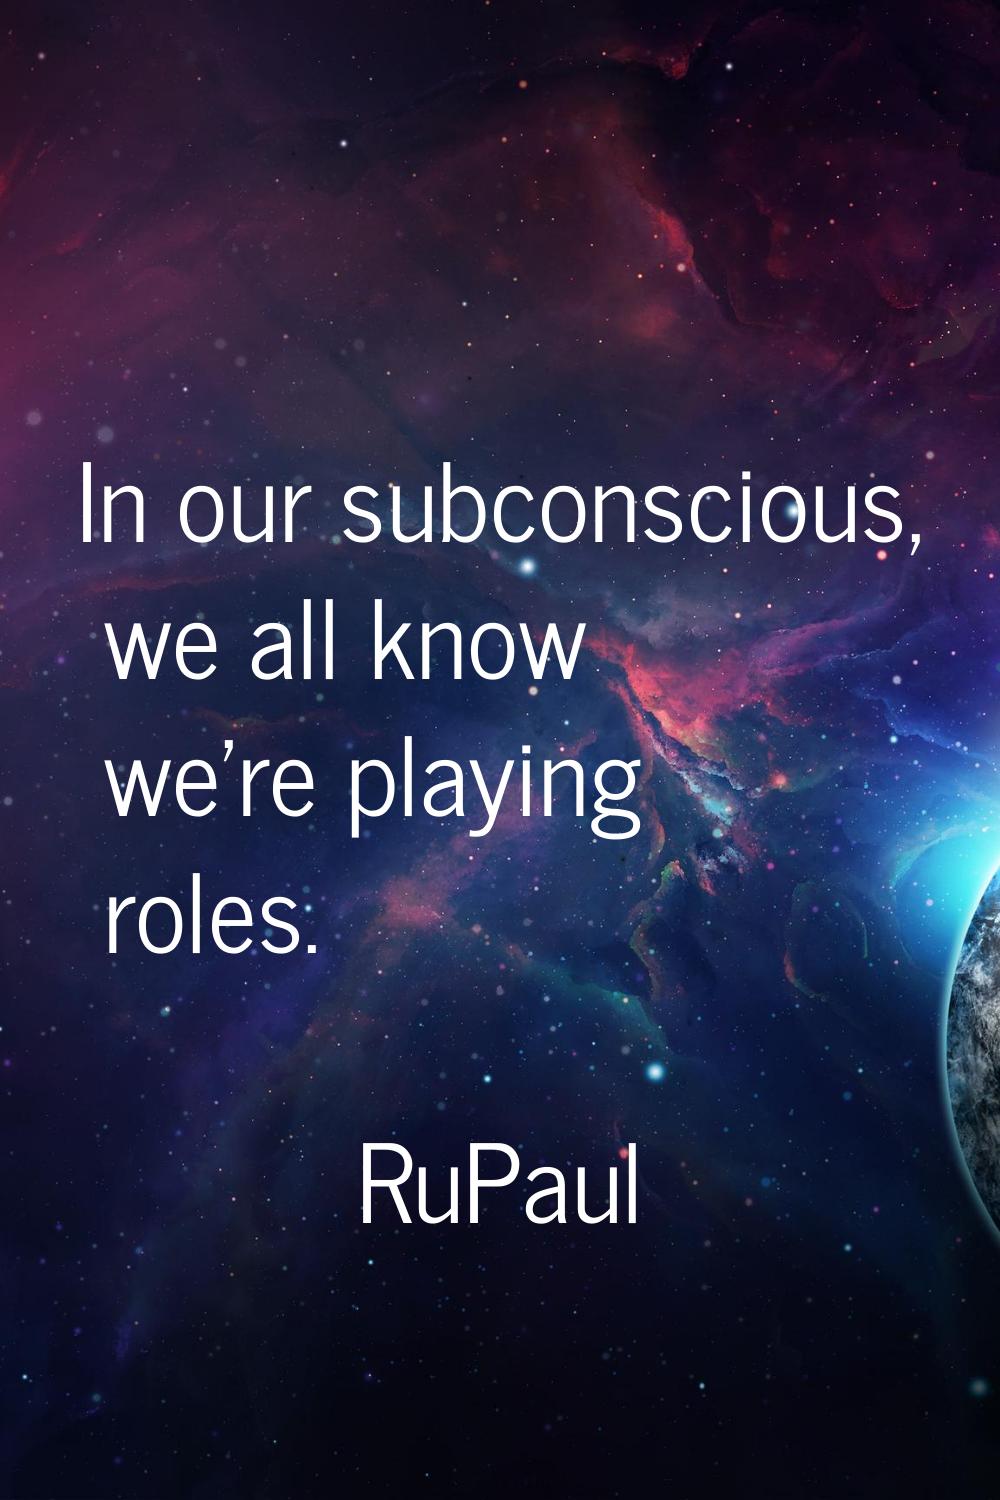 In our subconscious, we all know we're playing roles.